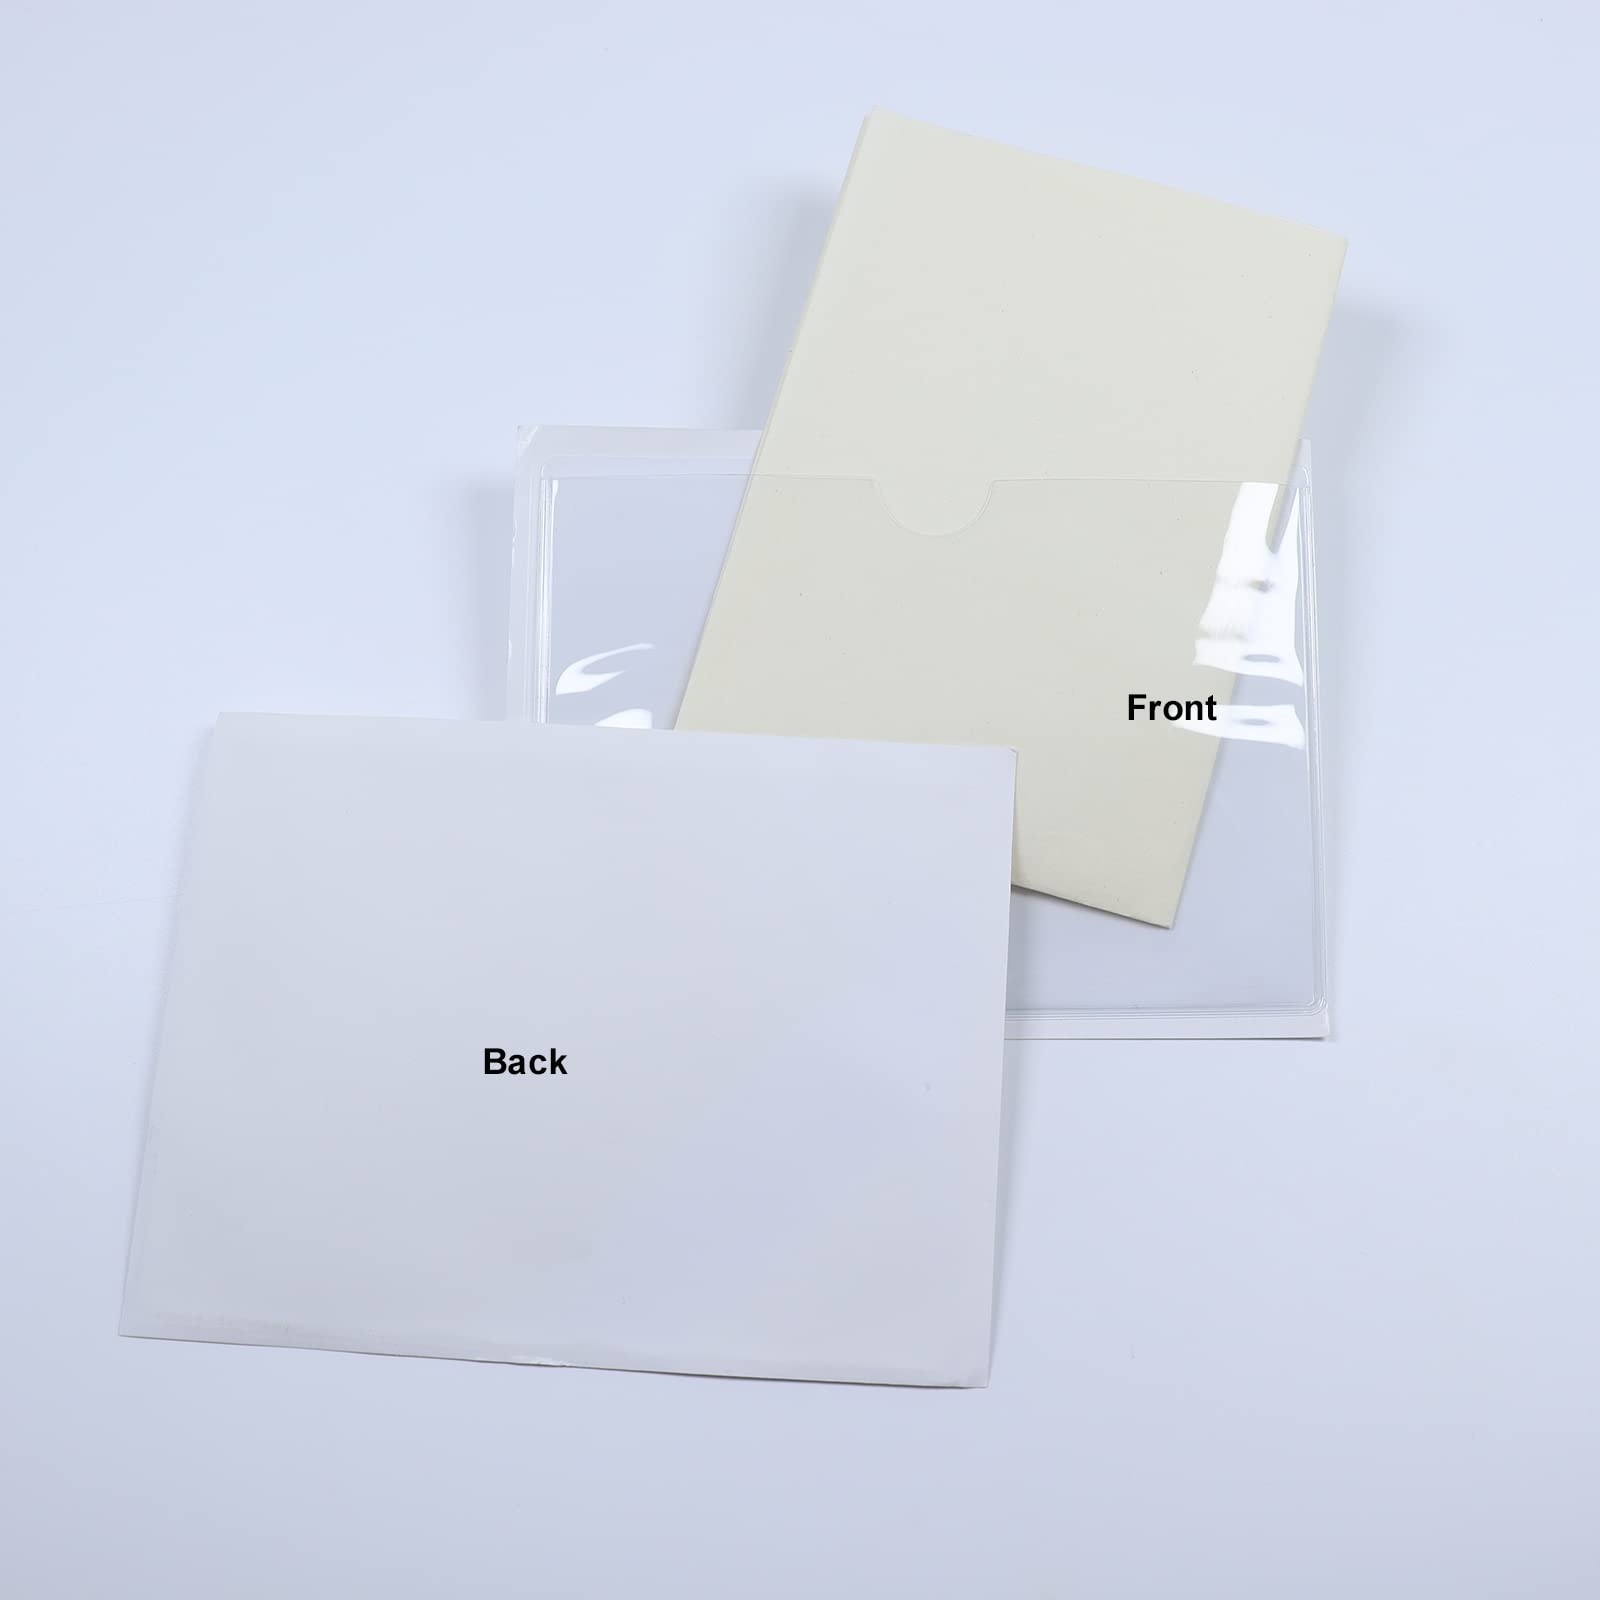 Baikeen Self Adhesive Clear Pockets,Clear Self Adhesive Card Label Pocket Holders Photo Pockets Sleeves for Index Cards,Planners,Cabinets,Shelves 10Pieces (160x110mm)